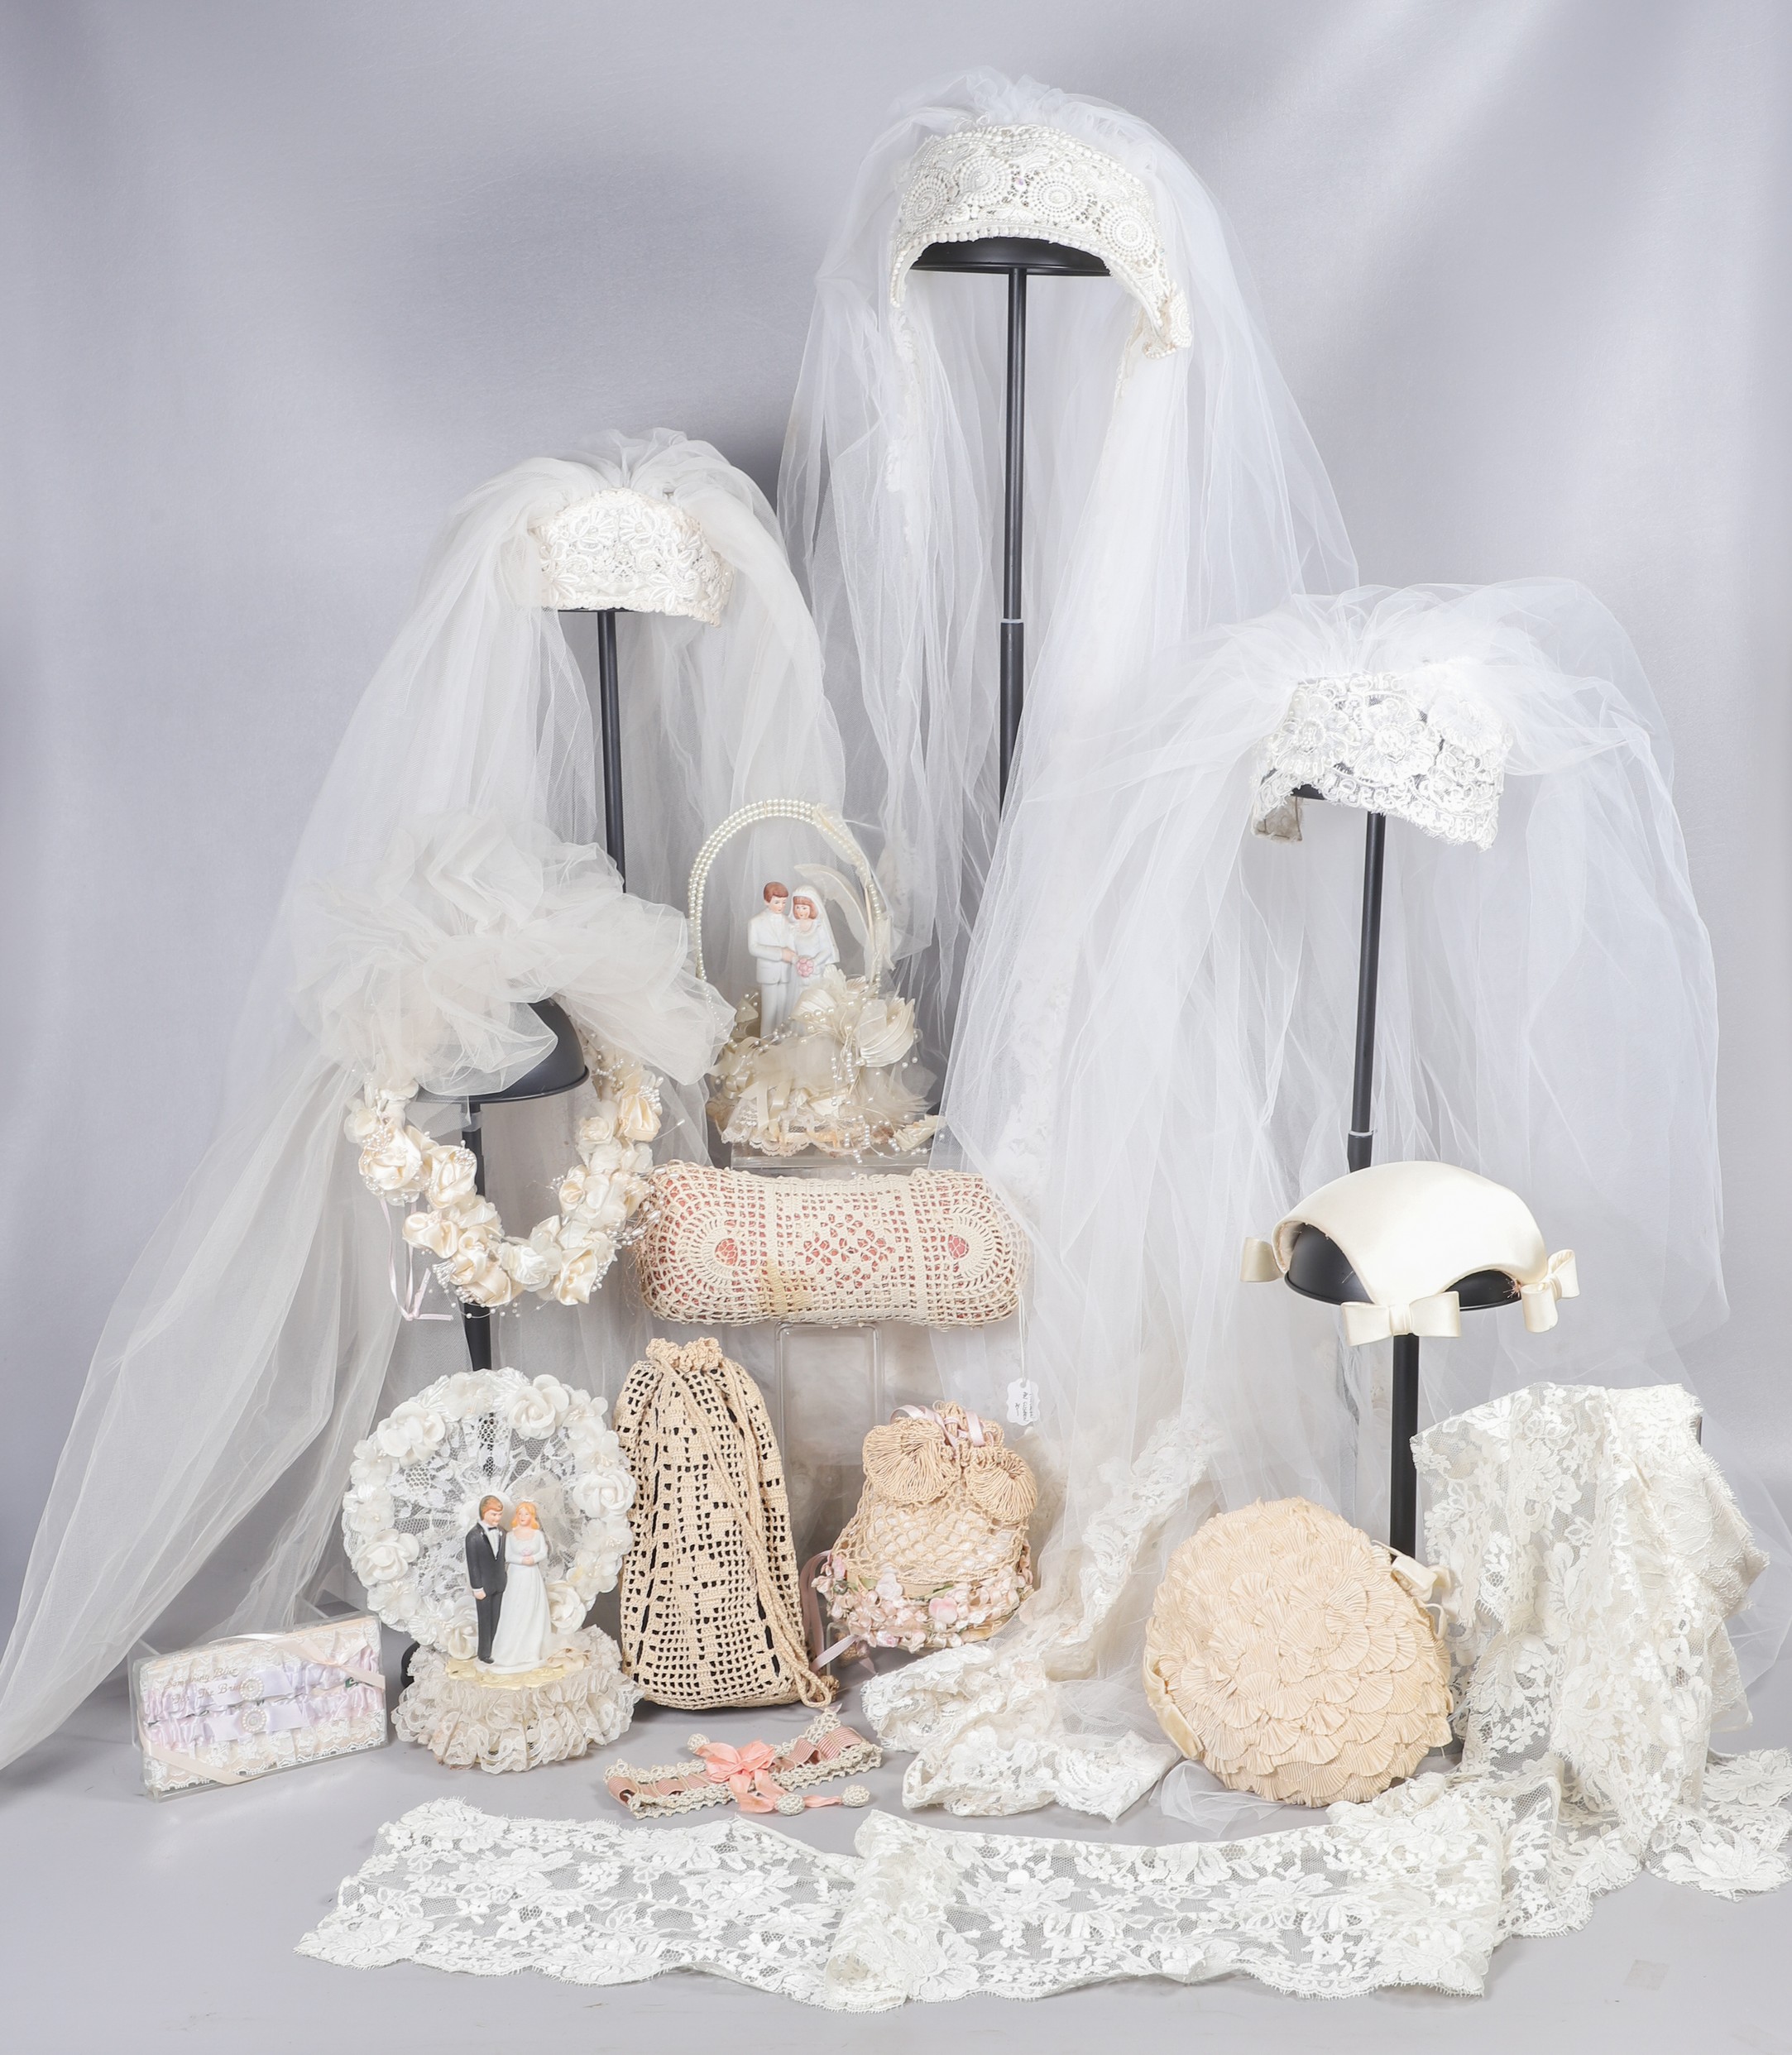 Vintage wedding items to include